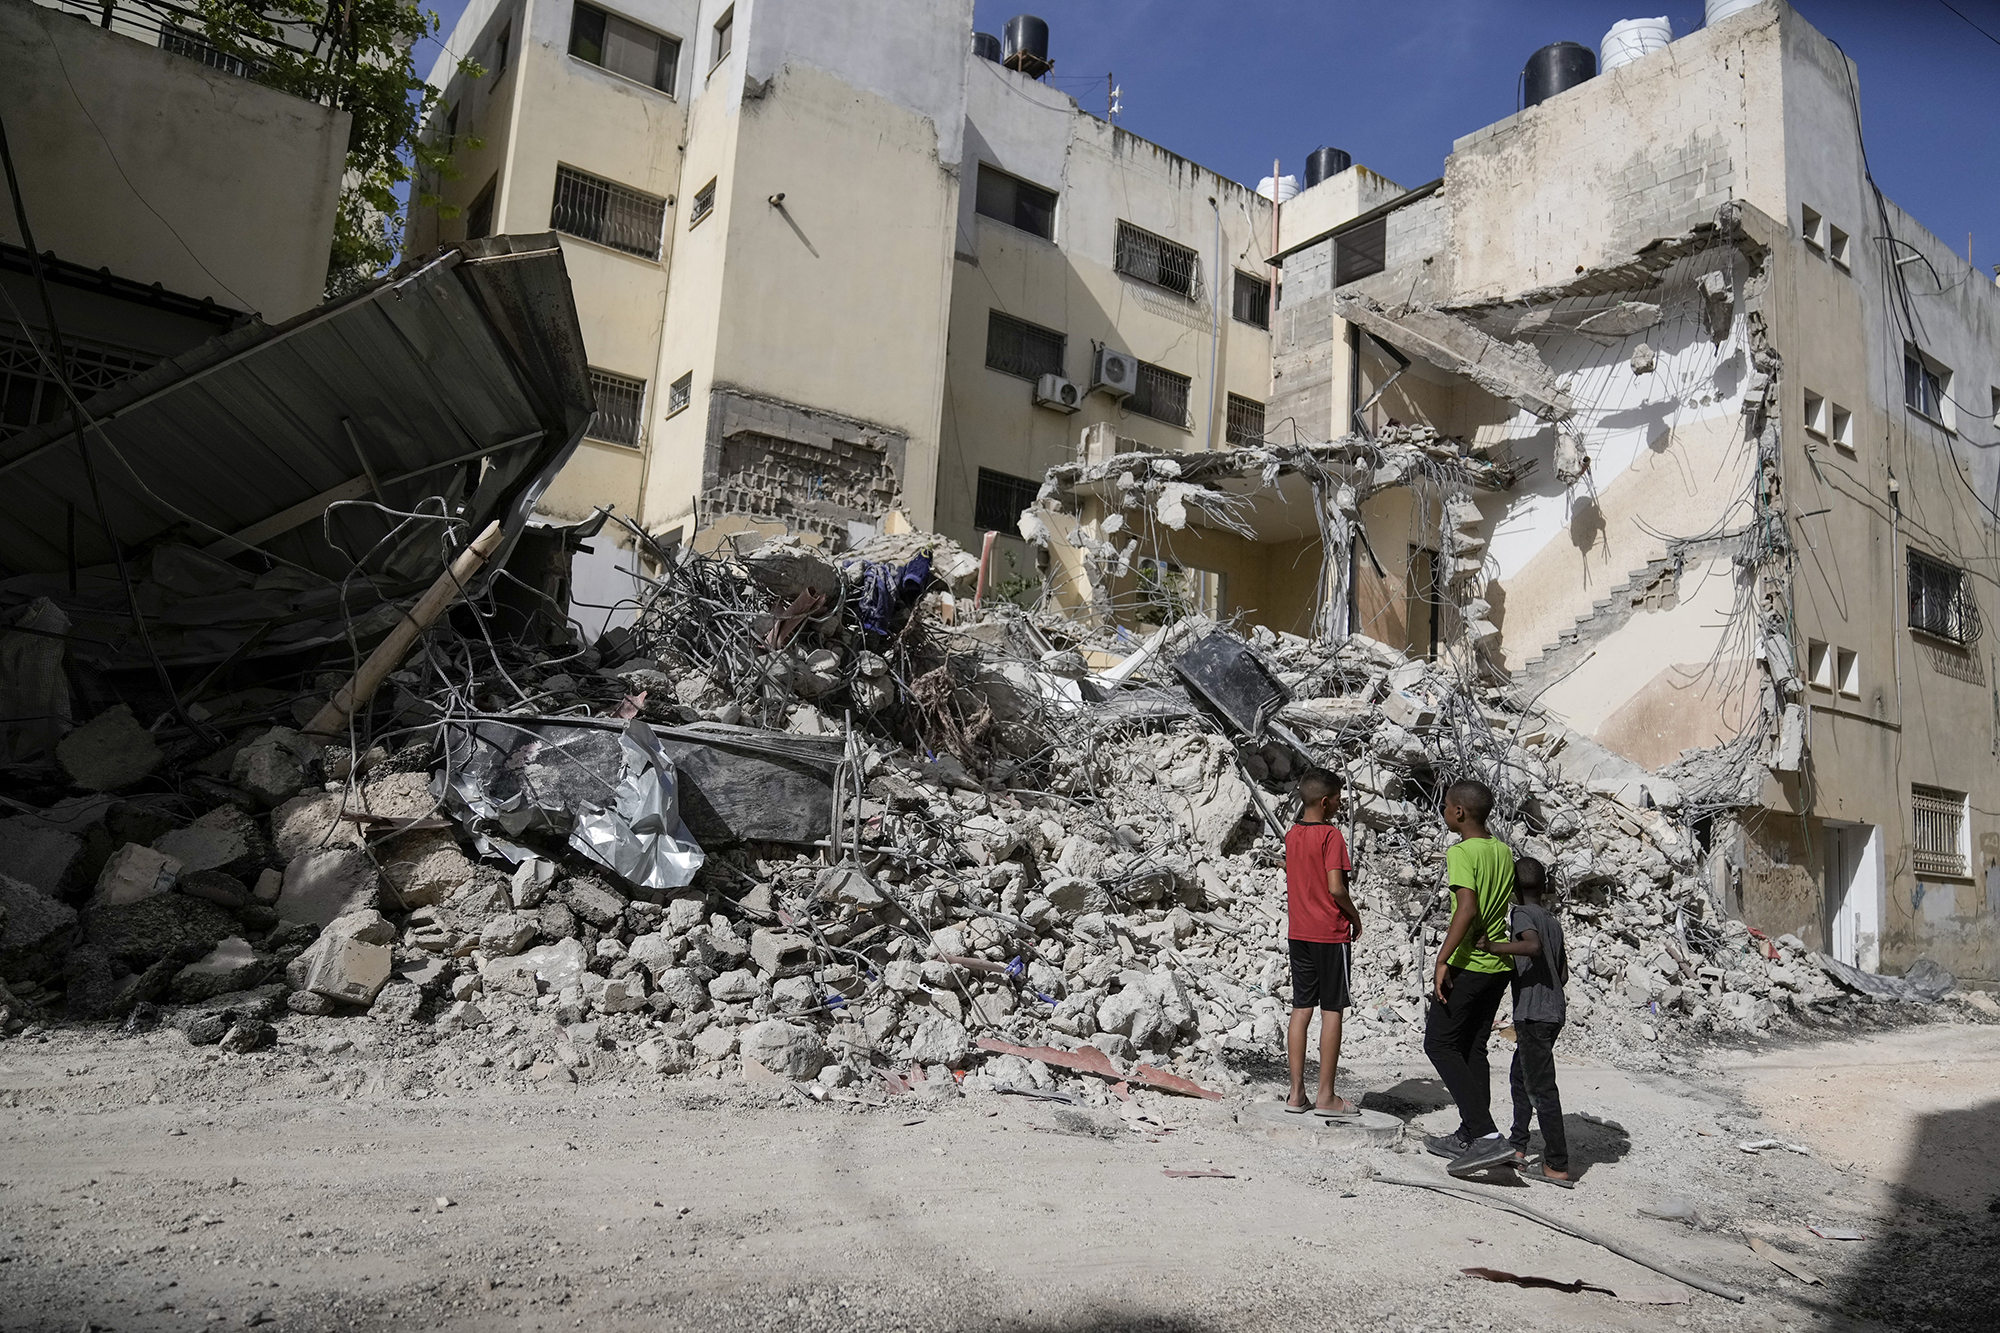 Palestinian children look at a damaged building after Israeli forces raided the West Bank city of Jenin, on May 23.